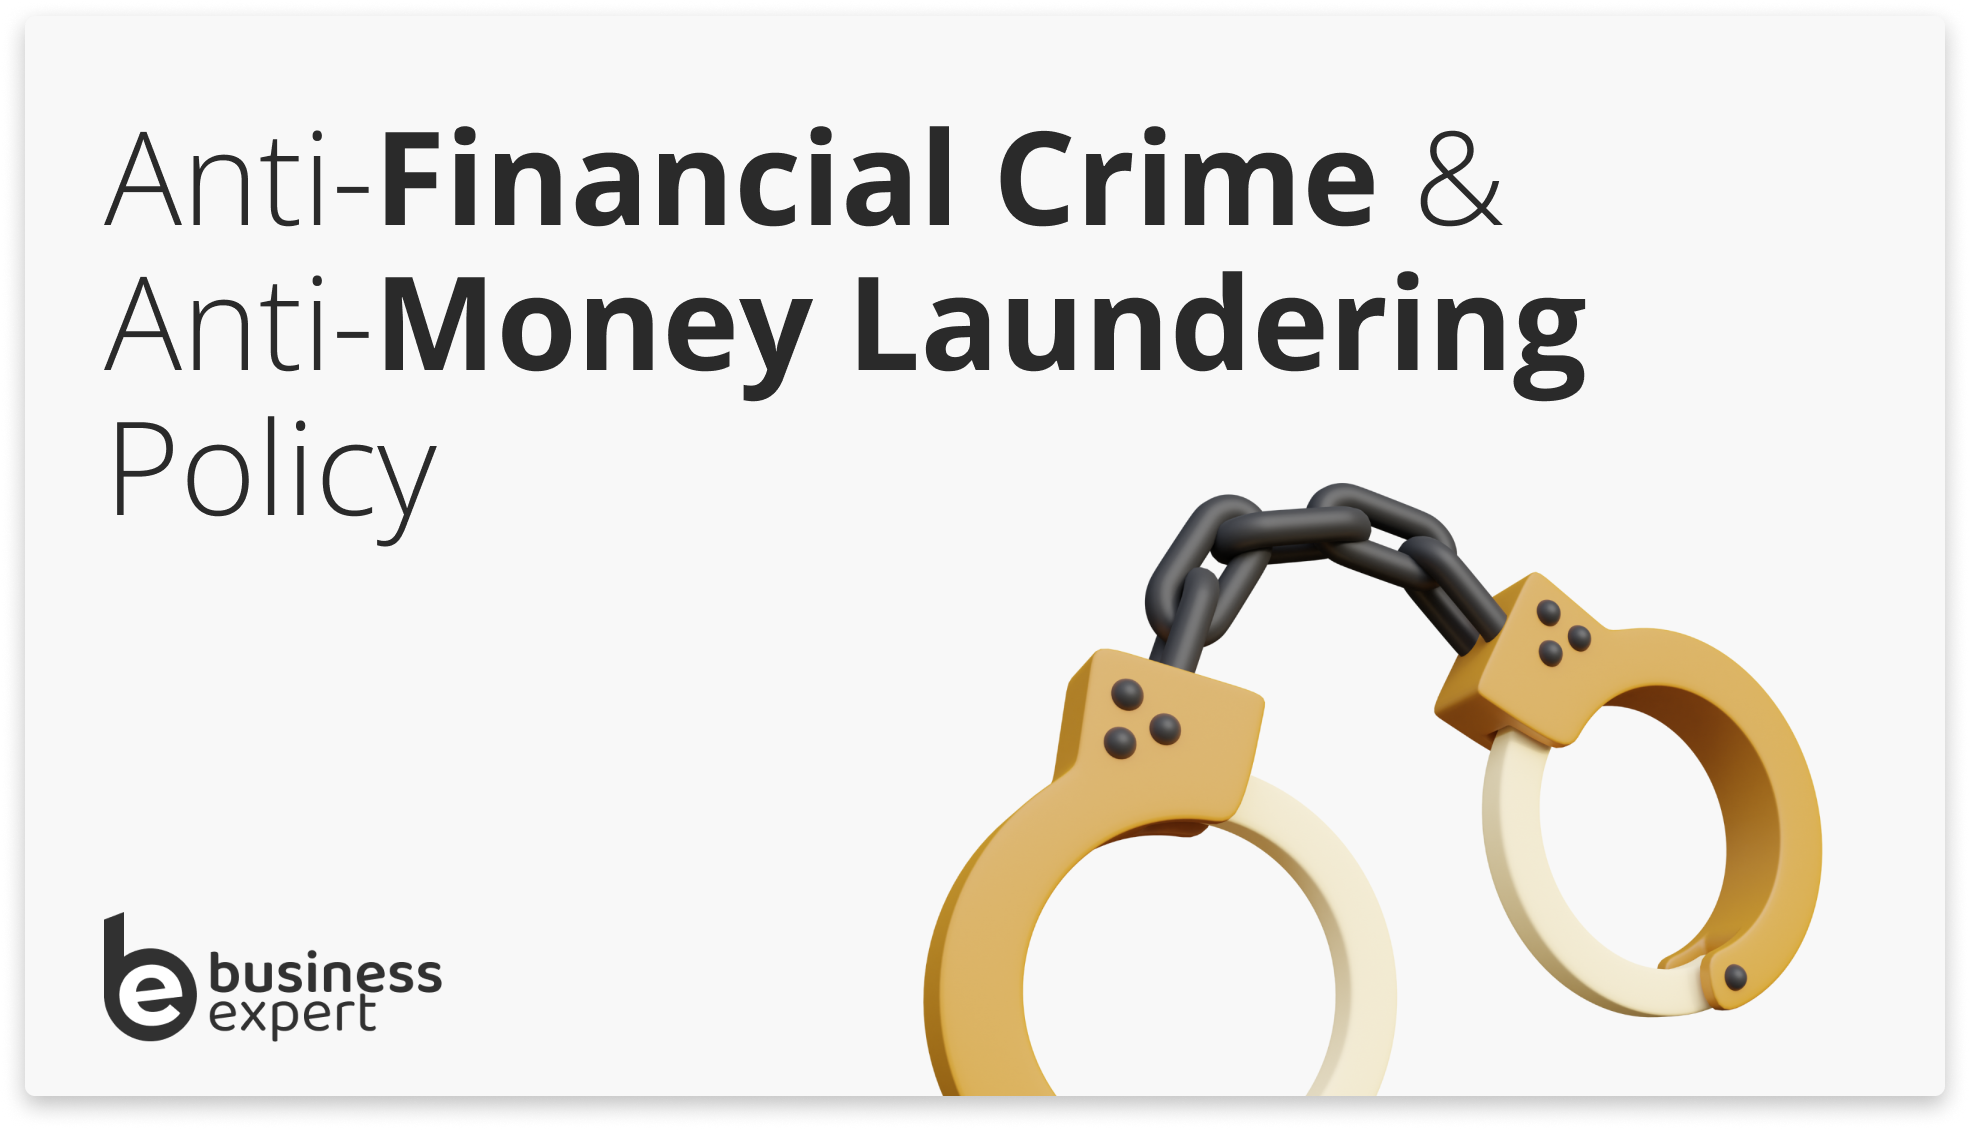 Anti-Financial Crime & Anti-Money Laundering Policy